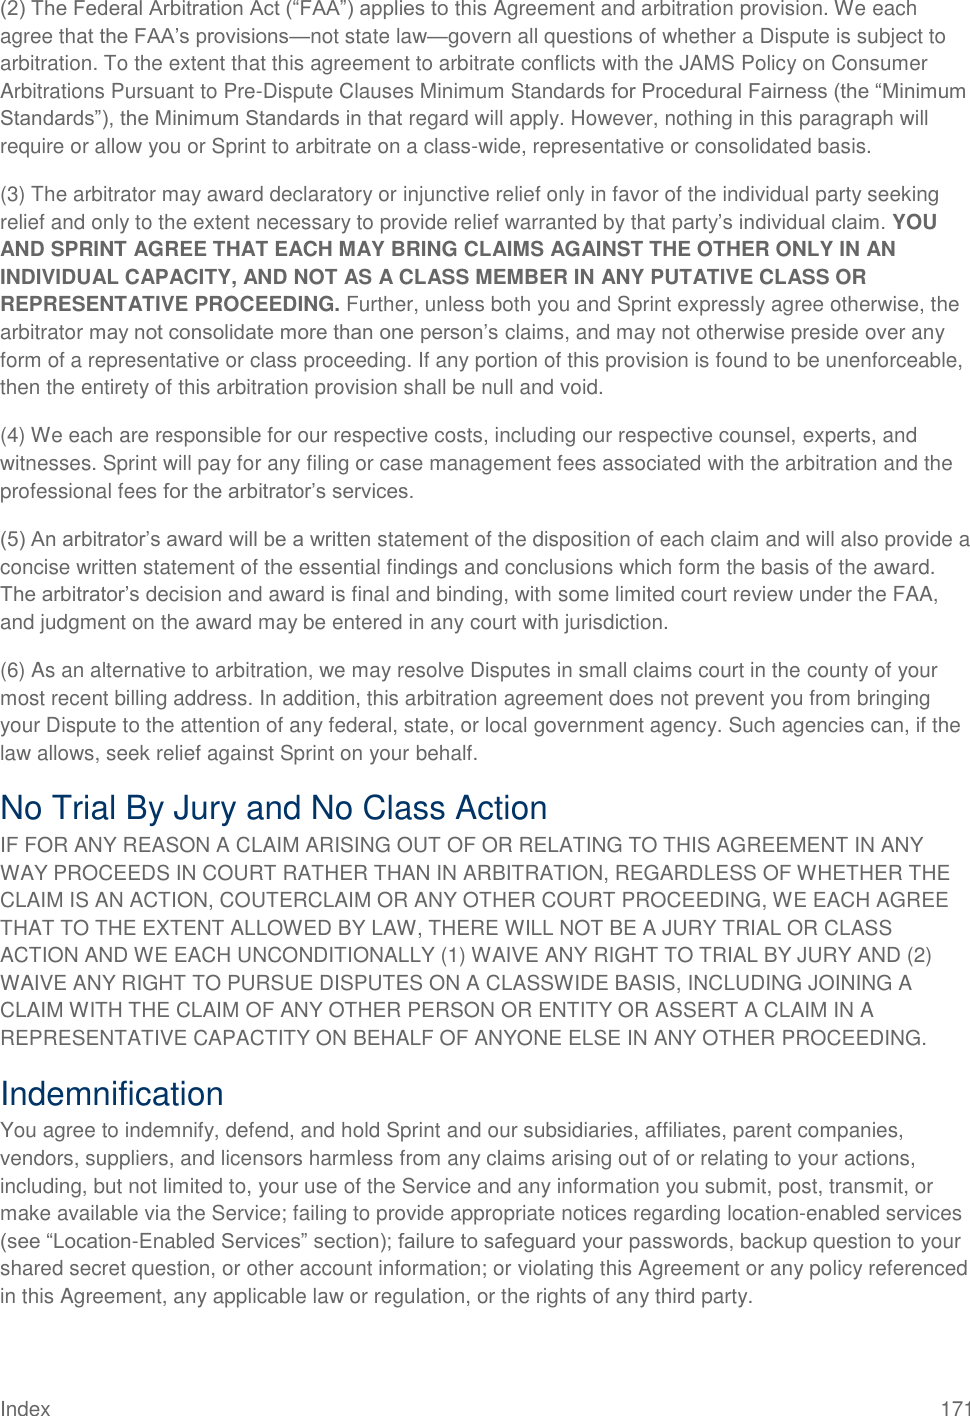 Index 171 (2) The Federal Arbitration Act (―FAA‖) applies to this Agreement and arbitration provision. We each agree that the FAA‘s provisions—not state law—govern all questions of whether a Dispute is subject to arbitration. To the extent that this agreement to arbitrate conflicts with the JAMS Policy on Consumer Arbitrations Pursuant to Pre-Dispute Clauses Minimum Standards for Procedural Fairness (the ―Minimum Standards‖), the Minimum Standards in that regard will apply. However, nothing in this paragraph will require or allow you or Sprint to arbitrate on a class-wide, representative or consolidated basis. (3) The arbitrator may award declaratory or injunctive relief only in favor of the individual party seeking relief and only to the extent necessary to provide relief warranted by that party‘s individual claim. YOU AND SPRINT AGREE THAT EACH MAY BRING CLAIMS AGAINST THE OTHER ONLY IN AN INDIVIDUAL CAPACITY, AND NOT AS A CLASS MEMBER IN ANY PUTATIVE CLASS OR REPRESENTATIVE PROCEEDING. Further, unless both you and Sprint expressly agree otherwise, the arbitrator may not consolidate more than one person‘s claims, and may not otherwise preside over any form of a representative or class proceeding. If any portion of this provision is found to be unenforceable, then the entirety of this arbitration provision shall be null and void.  (4) We each are responsible for our respective costs, including our respective counsel, experts, and witnesses. Sprint will pay for any filing or case management fees associated with the arbitration and the professional fees for the arbitrator‘s services. (5) An arbitrator‘s award will be a written statement of the disposition of each claim and will also provide a concise written statement of the essential findings and conclusions which form the basis of the award. The arbitrator‘s decision and award is final and binding, with some limited court review under the FAA, and judgment on the award may be entered in any court with jurisdiction. (6) As an alternative to arbitration, we may resolve Disputes in small claims court in the county of your most recent billing address. In addition, this arbitration agreement does not prevent you from bringing your Dispute to the attention of any federal, state, or local government agency. Such agencies can, if the law allows, seek relief against Sprint on your behalf. No Trial By Jury and No Class Action IF FOR ANY REASON A CLAIM ARISING OUT OF OR RELATING TO THIS AGREEMENT IN ANY WAY PROCEEDS IN COURT RATHER THAN IN ARBITRATION, REGARDLESS OF WHETHER THE CLAIM IS AN ACTION, COUTERCLAIM OR ANY OTHER COURT PROCEEDING, WE EACH AGREE THAT TO THE EXTENT ALLOWED BY LAW, THERE WILL NOT BE A JURY TRIAL OR CLASS ACTION AND WE EACH UNCONDITIONALLY (1) WAIVE ANY RIGHT TO TRIAL BY JURY AND (2) WAIVE ANY RIGHT TO PURSUE DISPUTES ON A CLASSWIDE BASIS, INCLUDING JOINING A CLAIM WITH THE CLAIM OF ANY OTHER PERSON OR ENTITY OR ASSERT A CLAIM IN A REPRESENTATIVE CAPACTITY ON BEHALF OF ANYONE ELSE IN ANY OTHER PROCEEDING. Indemnification You agree to indemnify, defend, and hold Sprint and our subsidiaries, affiliates, parent companies, vendors, suppliers, and licensors harmless from any claims arising out of or relating to your actions, including, but not limited to, your use of the Service and any information you submit, post, transmit, or make available via the Service; failing to provide appropriate notices regarding location-enabled services (see ―Location-Enabled Services‖ section); failure to safeguard your passwords, backup question to your shared secret question, or other account information; or violating this Agreement or any policy referenced in this Agreement, any applicable law or regulation, or the rights of any third party. 